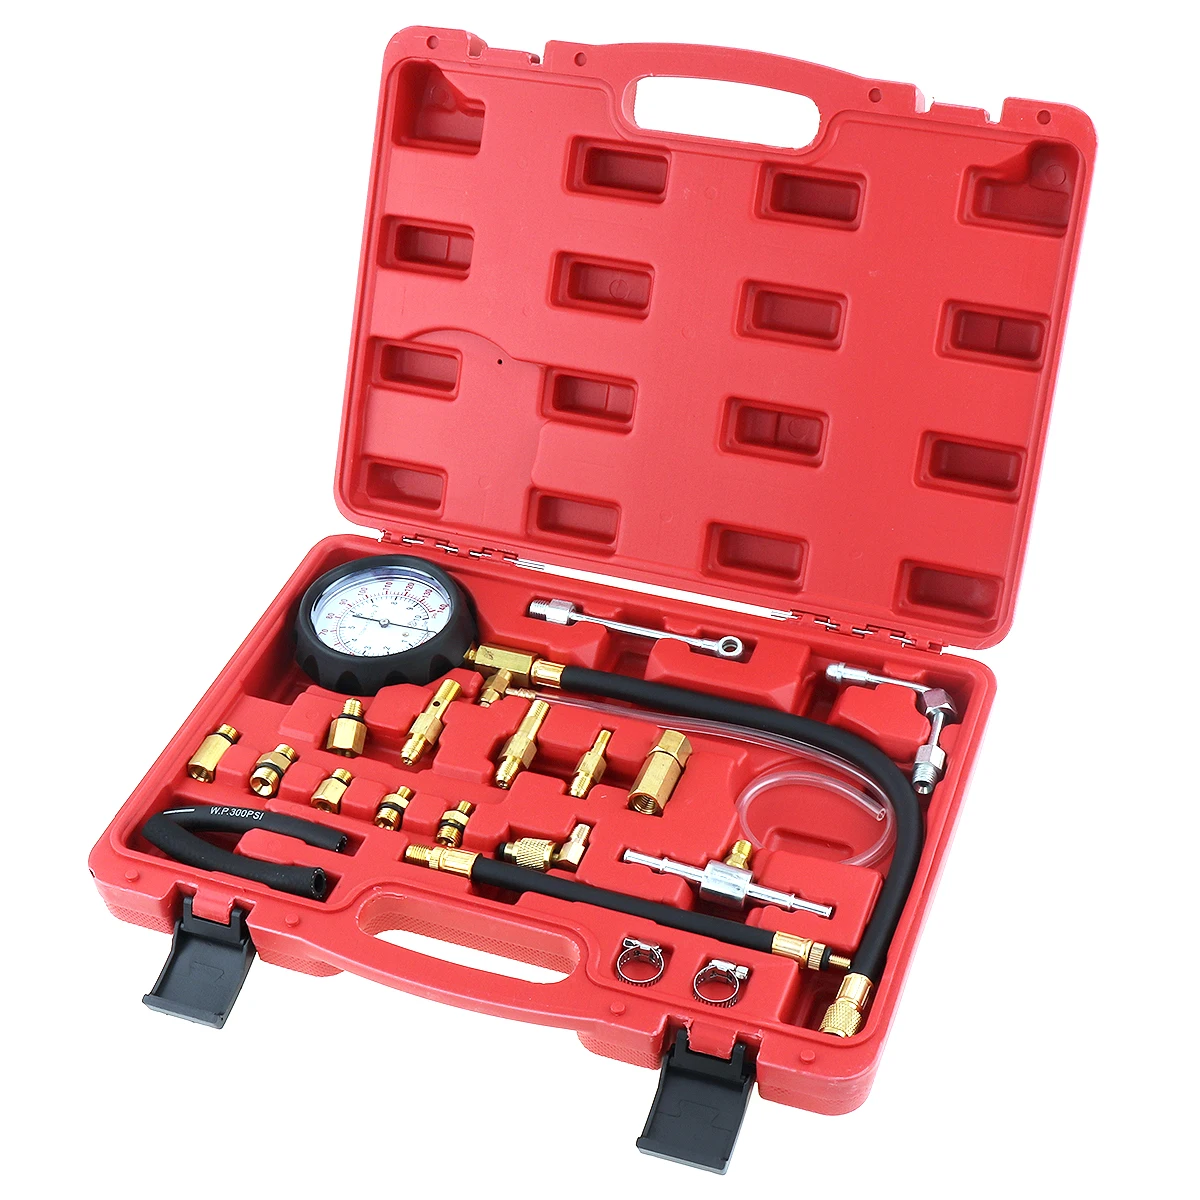 TU-114 0-140PSI 0-10 Bar Portable Compression Fuel Injection Pressure Diagnostic Tester Tools Kit with Safety Valve Drain Hose